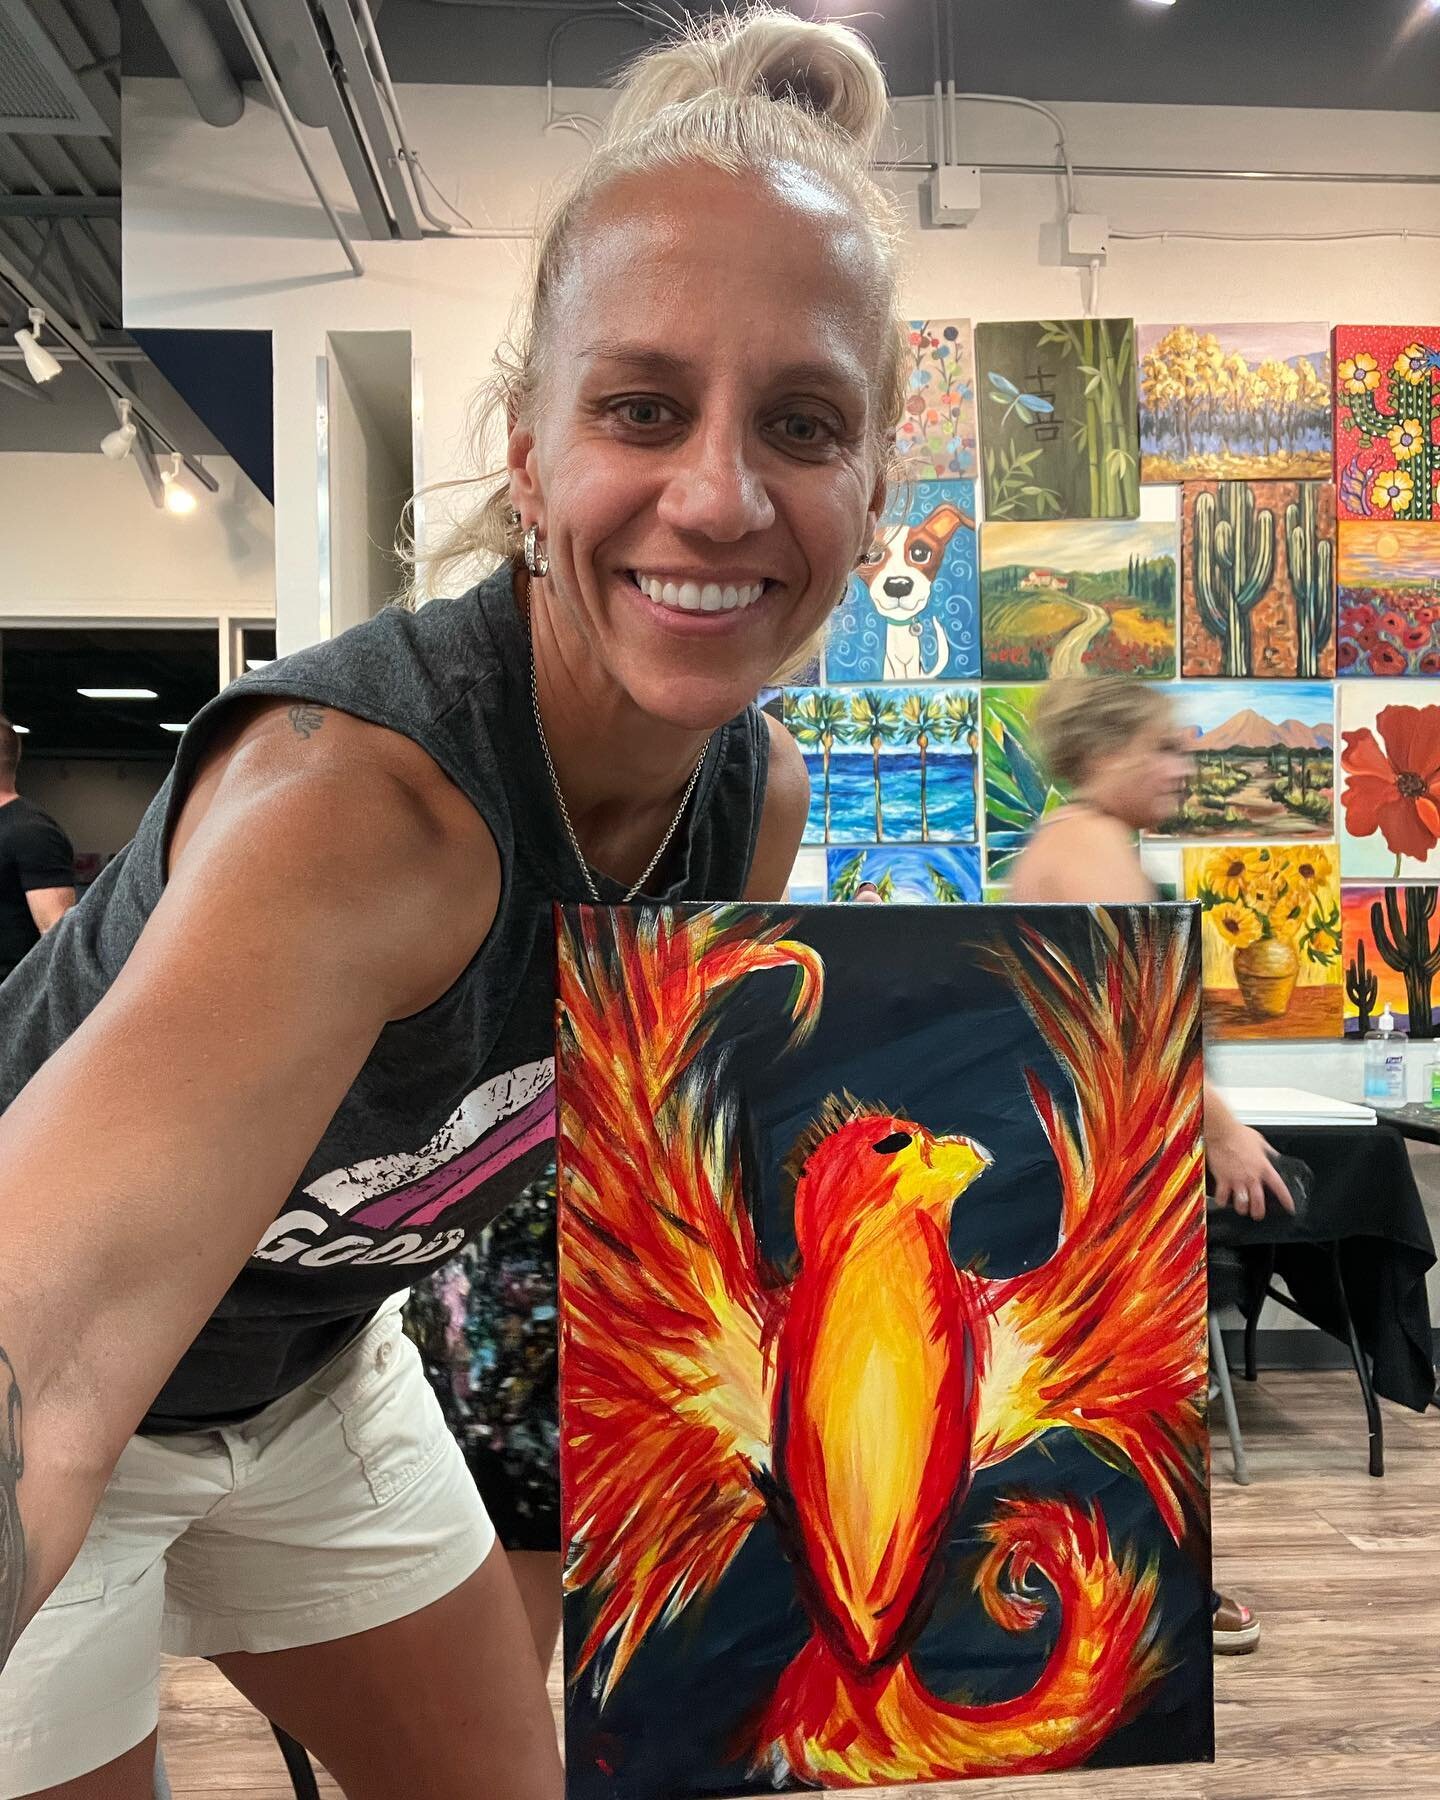 What a fun time! Thank you @erik_phoenix for telling me about this event with likeminded humans! I plan to do more with  @riserecoverlive - Today marks 1,281 days ✌🏾I loved sitting next to @mocktailsocialclub and doing my best to work a paint brush!